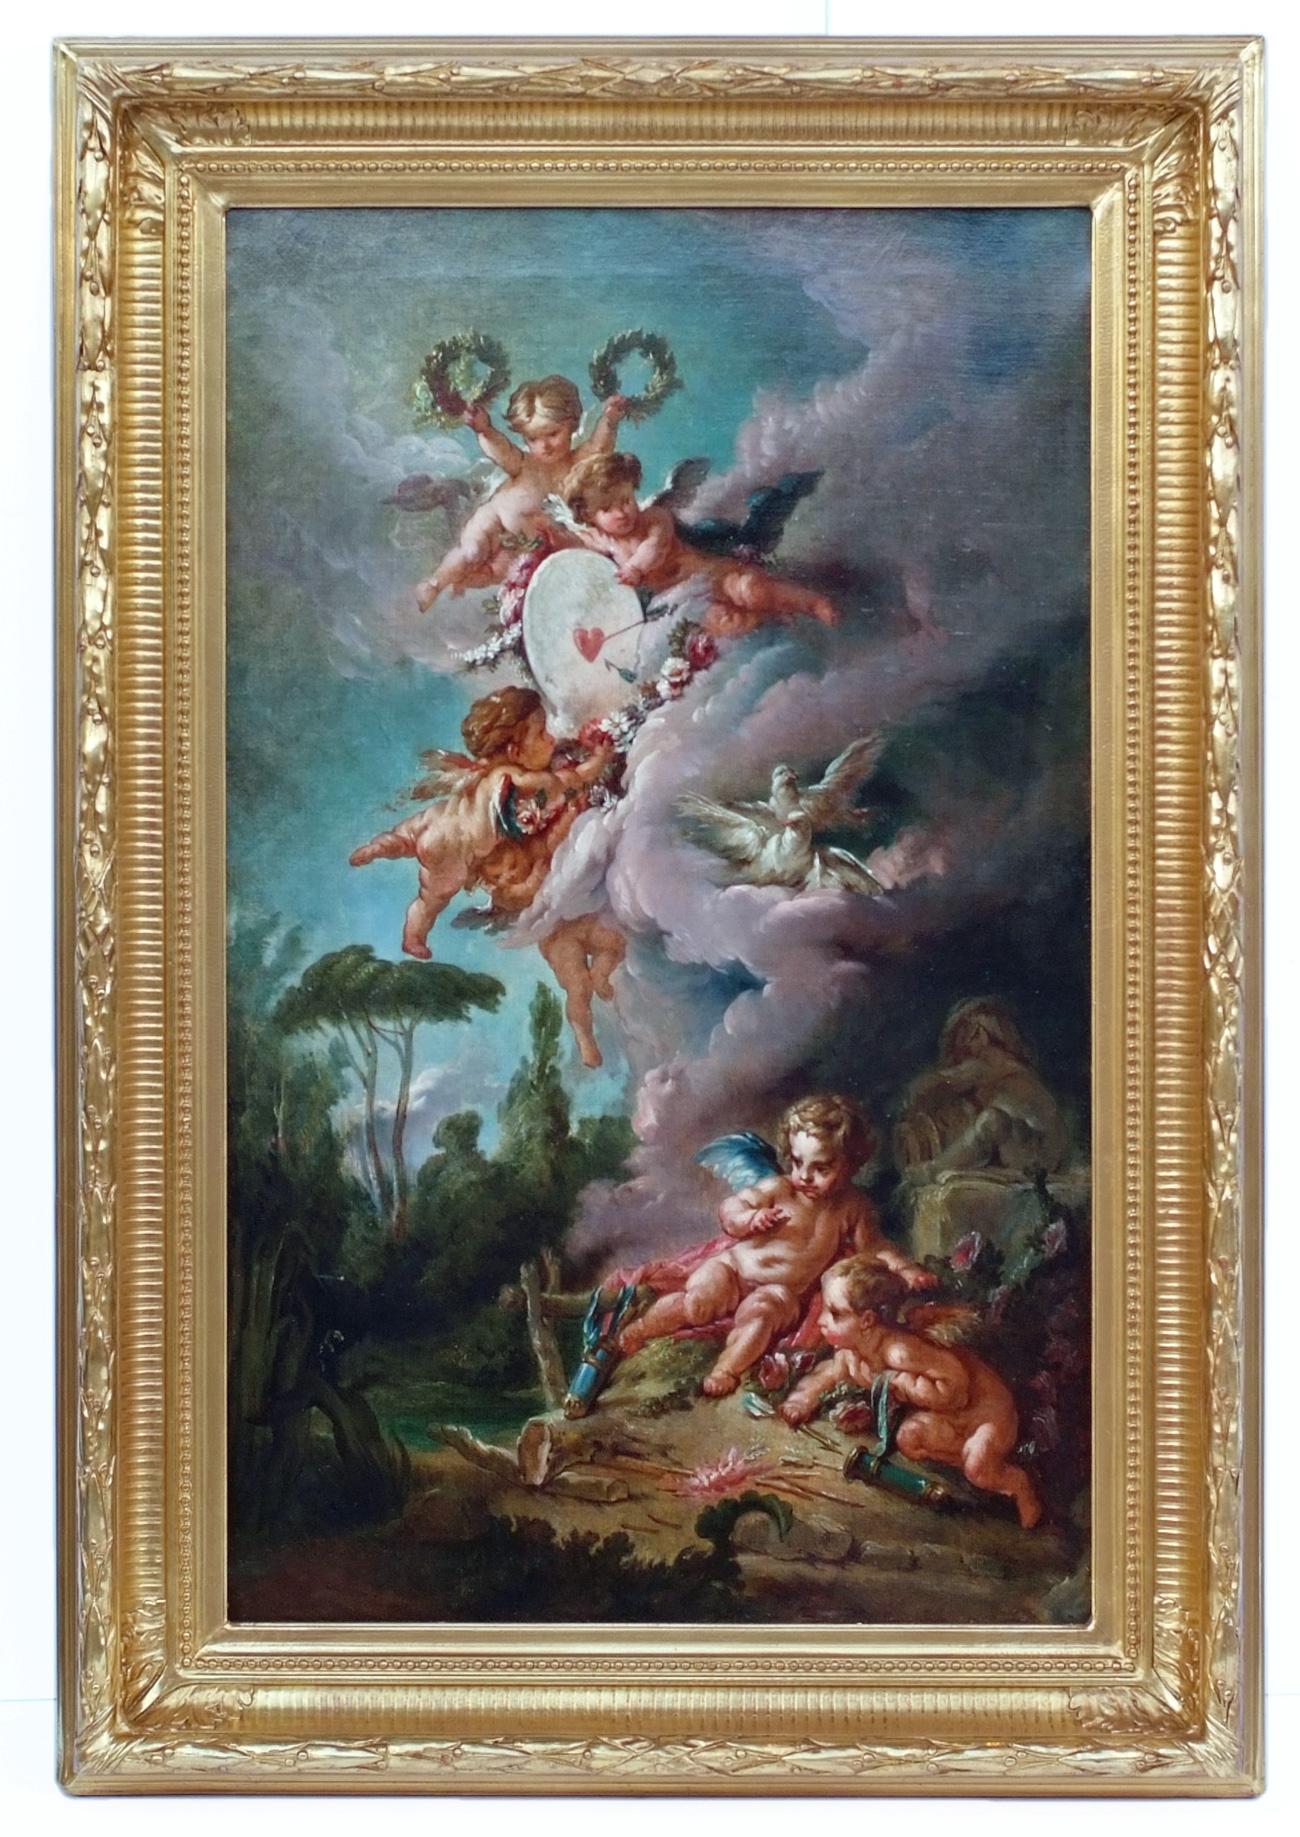 French School - Cupid's Target, from François Boucher (1758) 